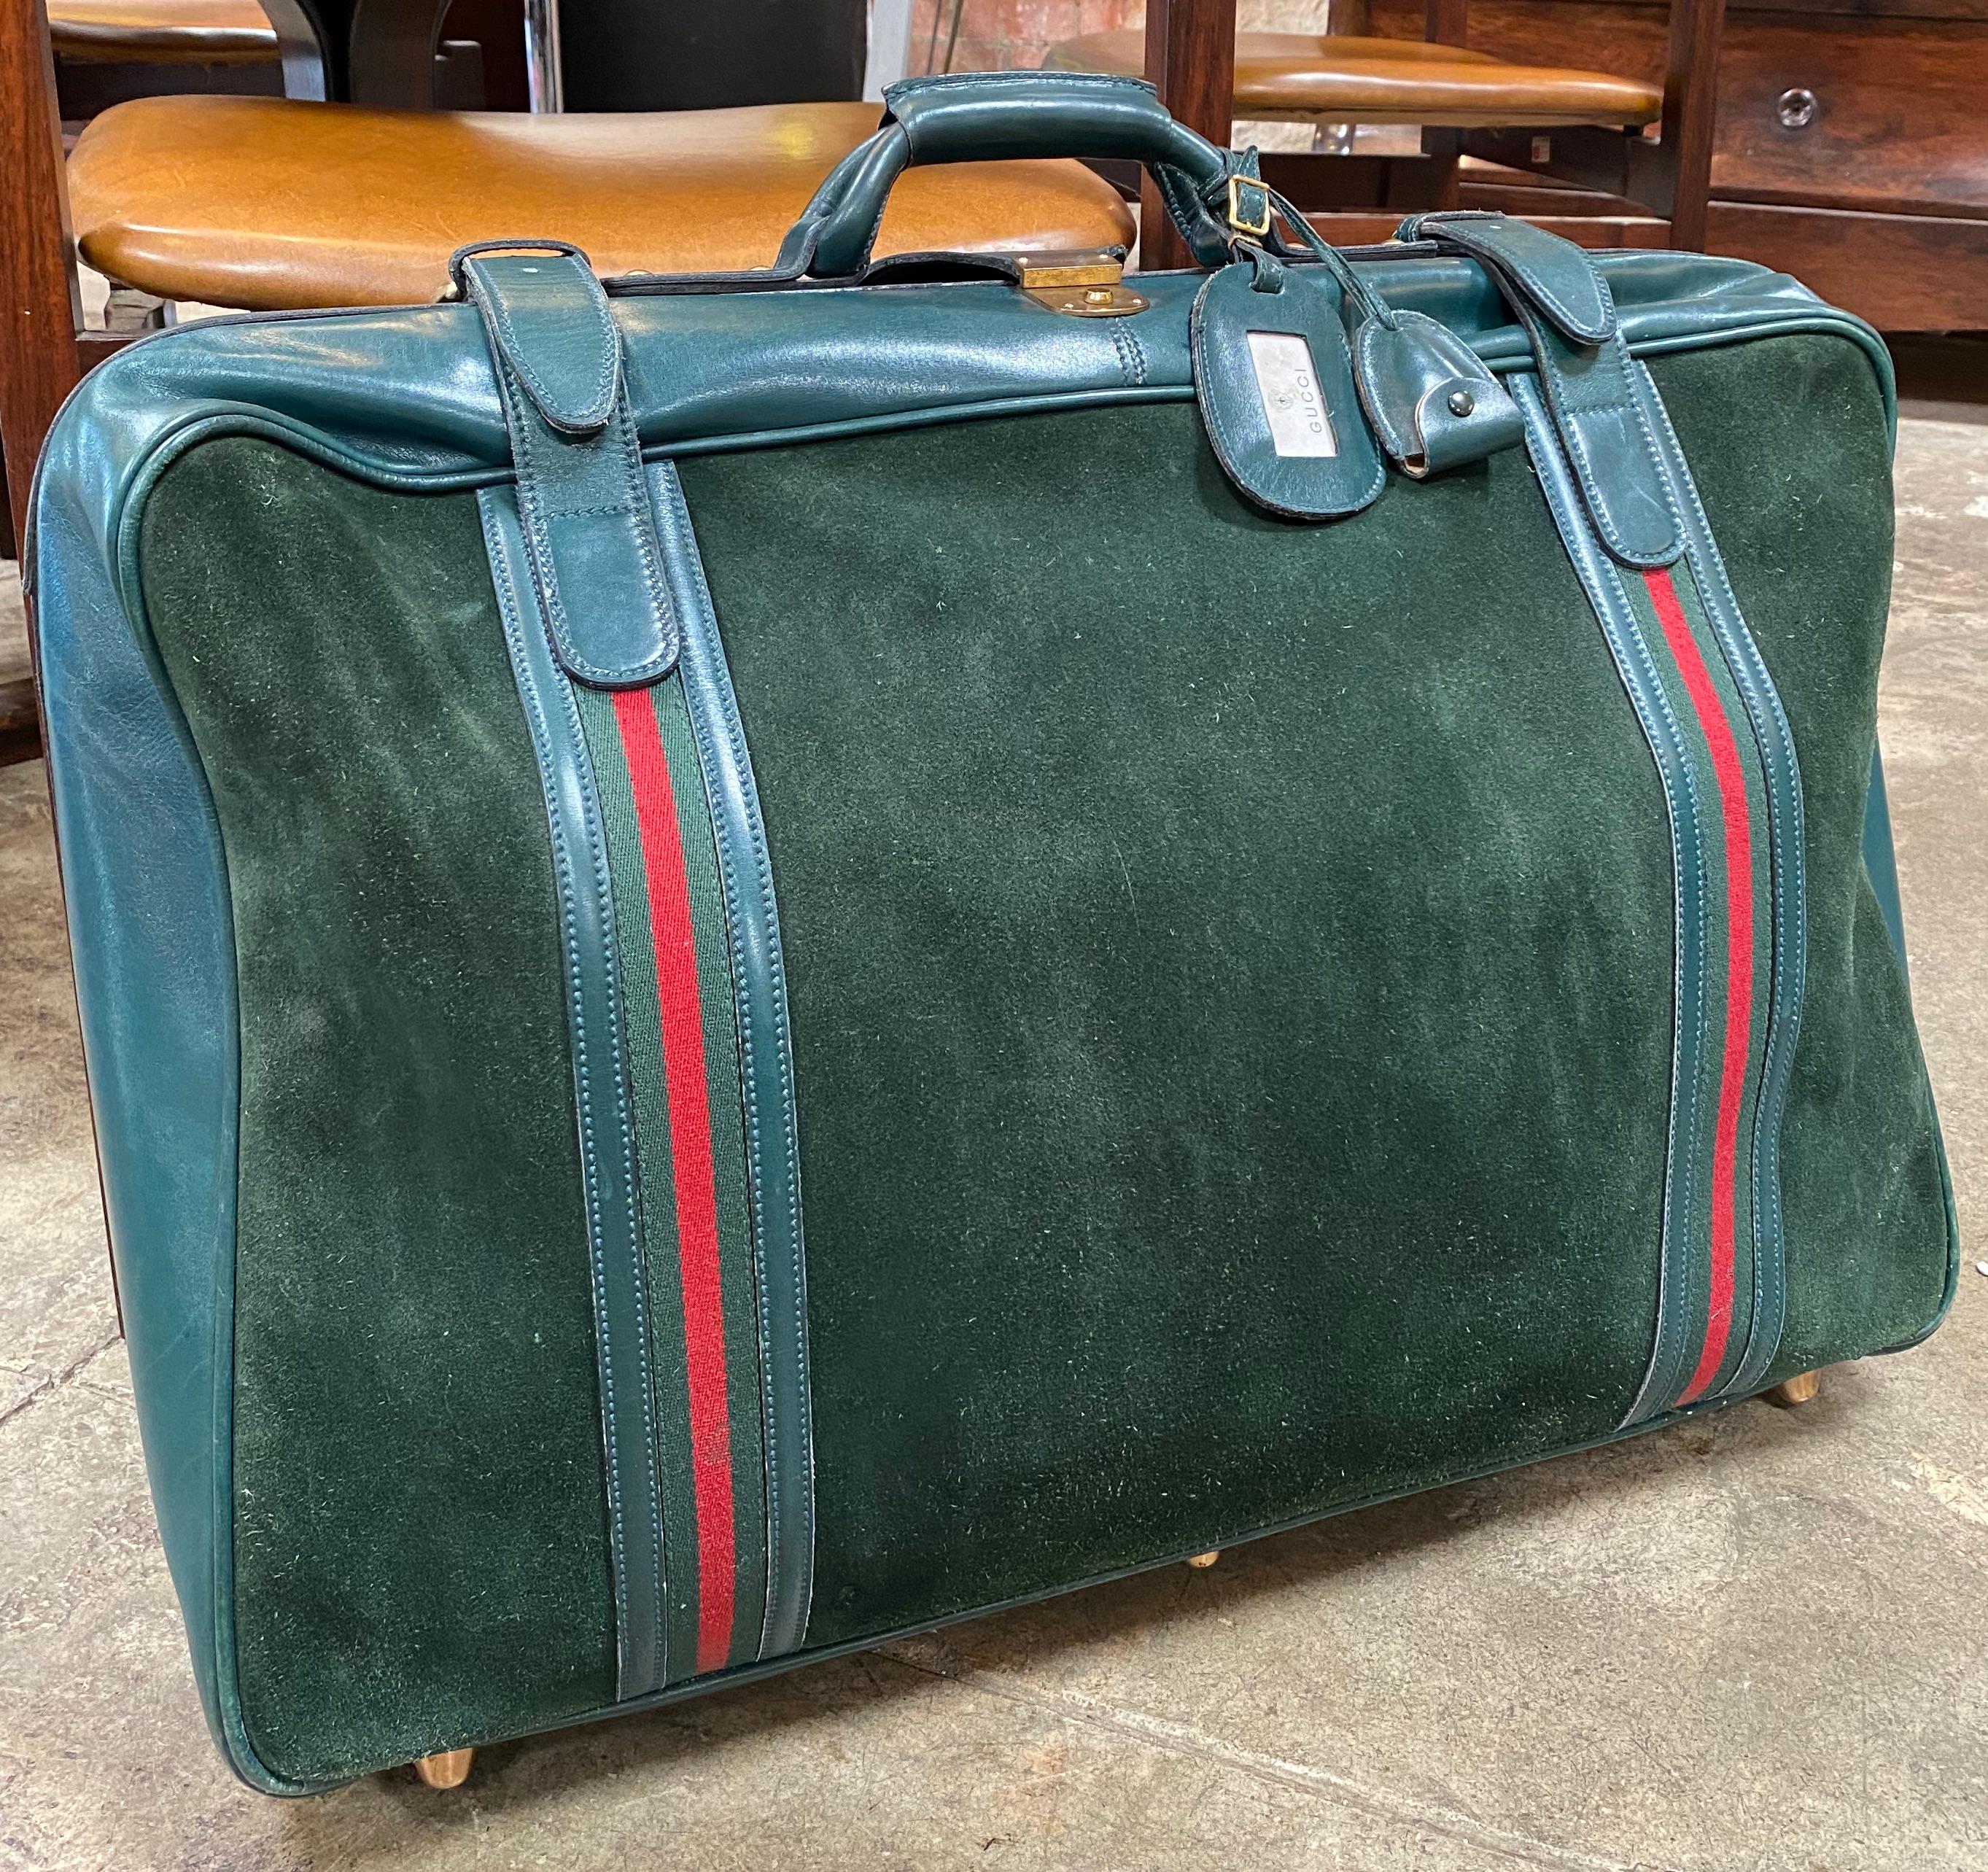 Vintage Gucci medium/large suitcase crafted in blue suede with blue leather trim. Gold metal hardware. Double wraparound zipper and fold over strap with security key closure (key is included). Additional double buckled straps on the sides of the